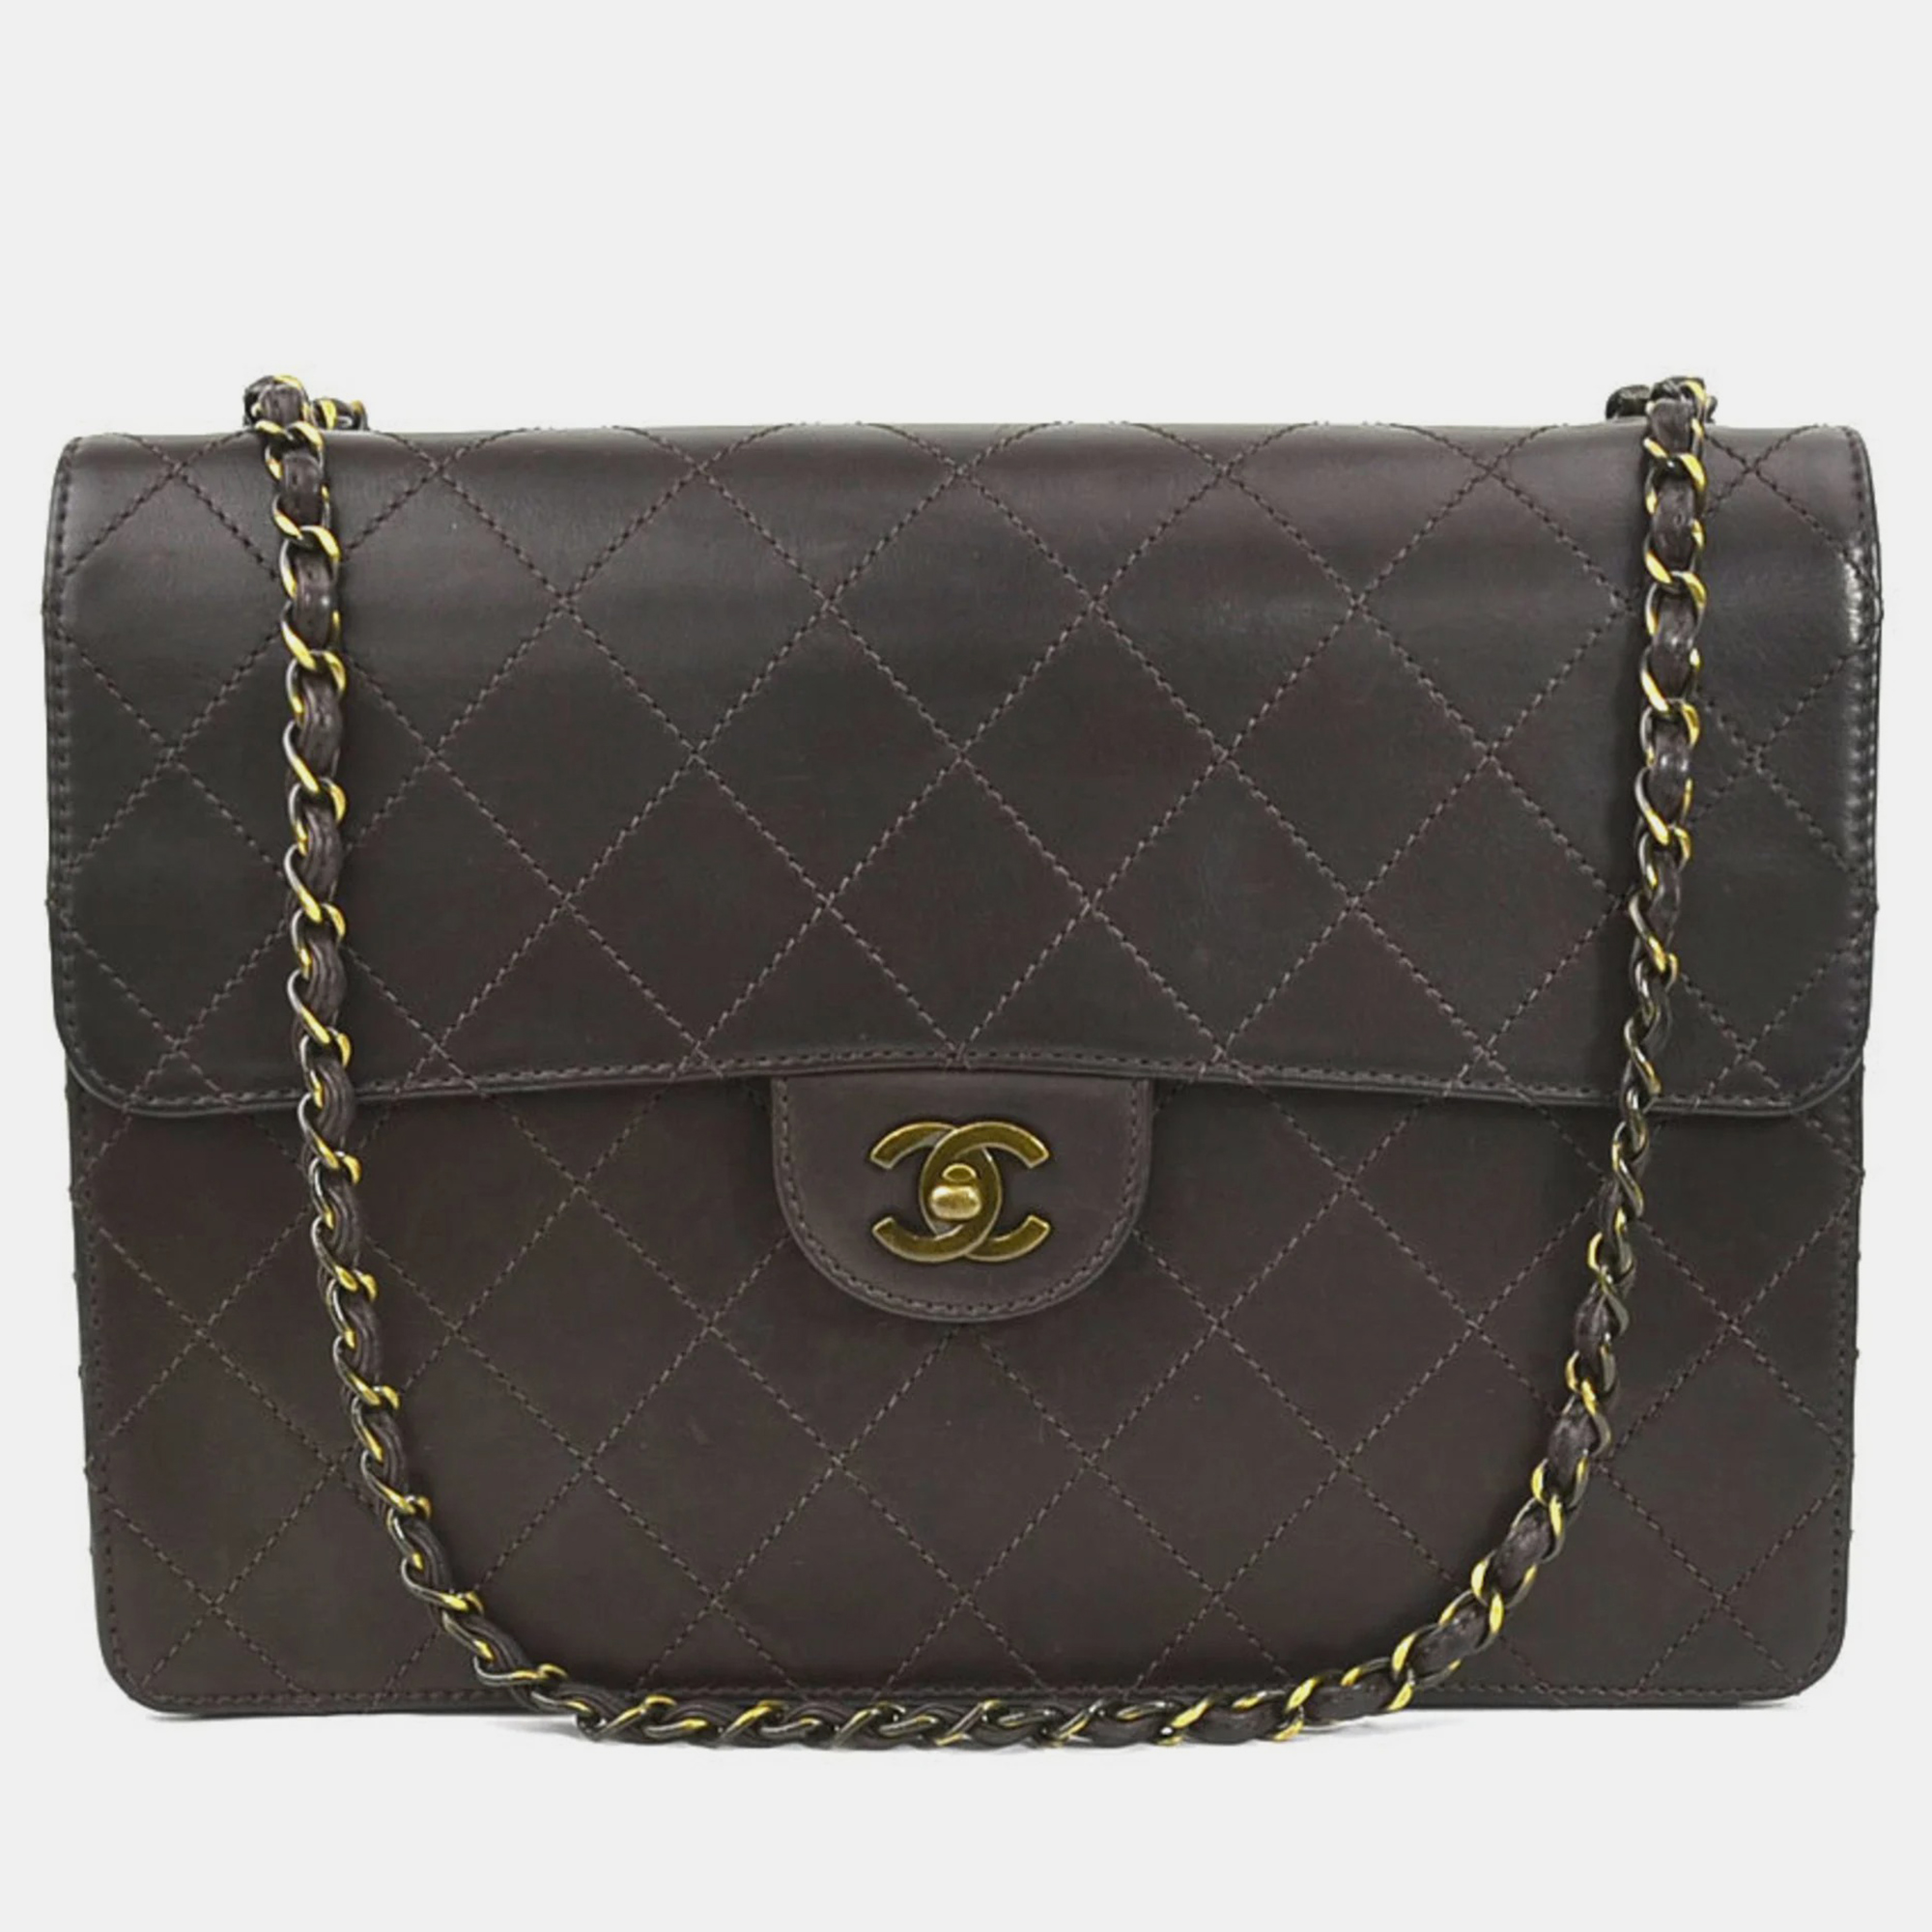 Chanel dark brown leather quilted jumbo classic single flap shoulder bag